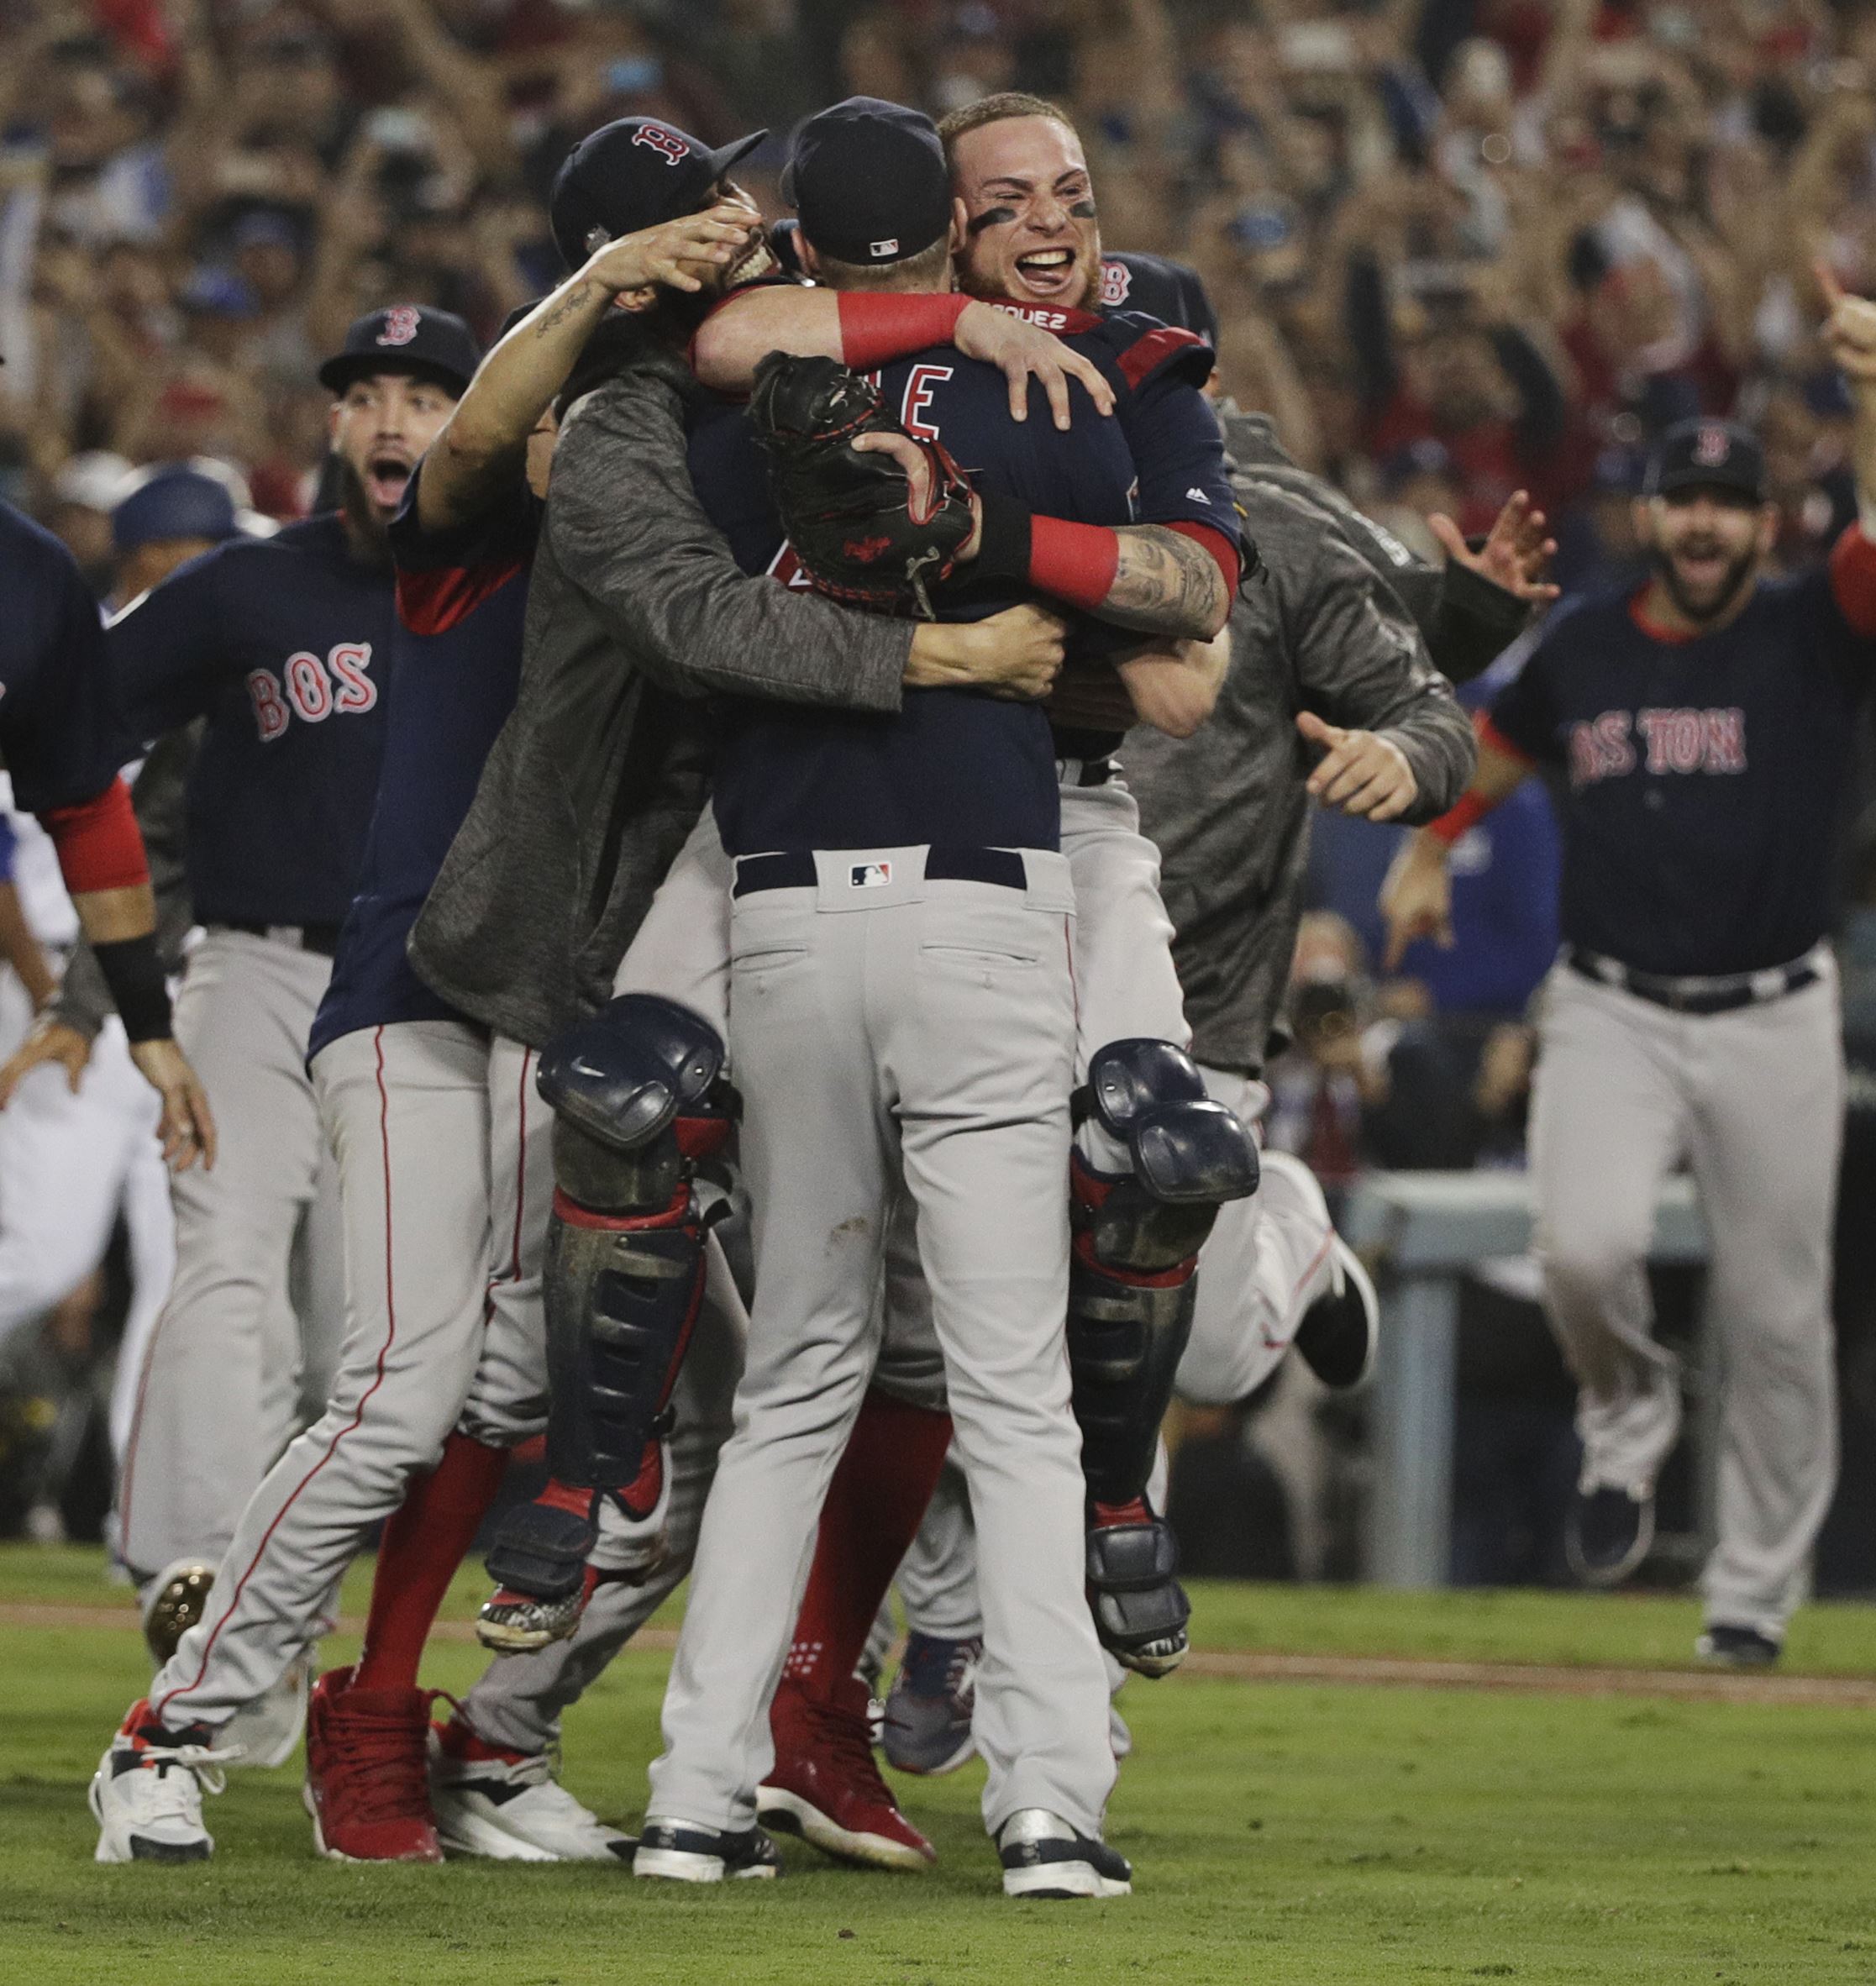 Red Sox beat Dodgers 5-1 to claim World Series title - The Blade2233 x 2364